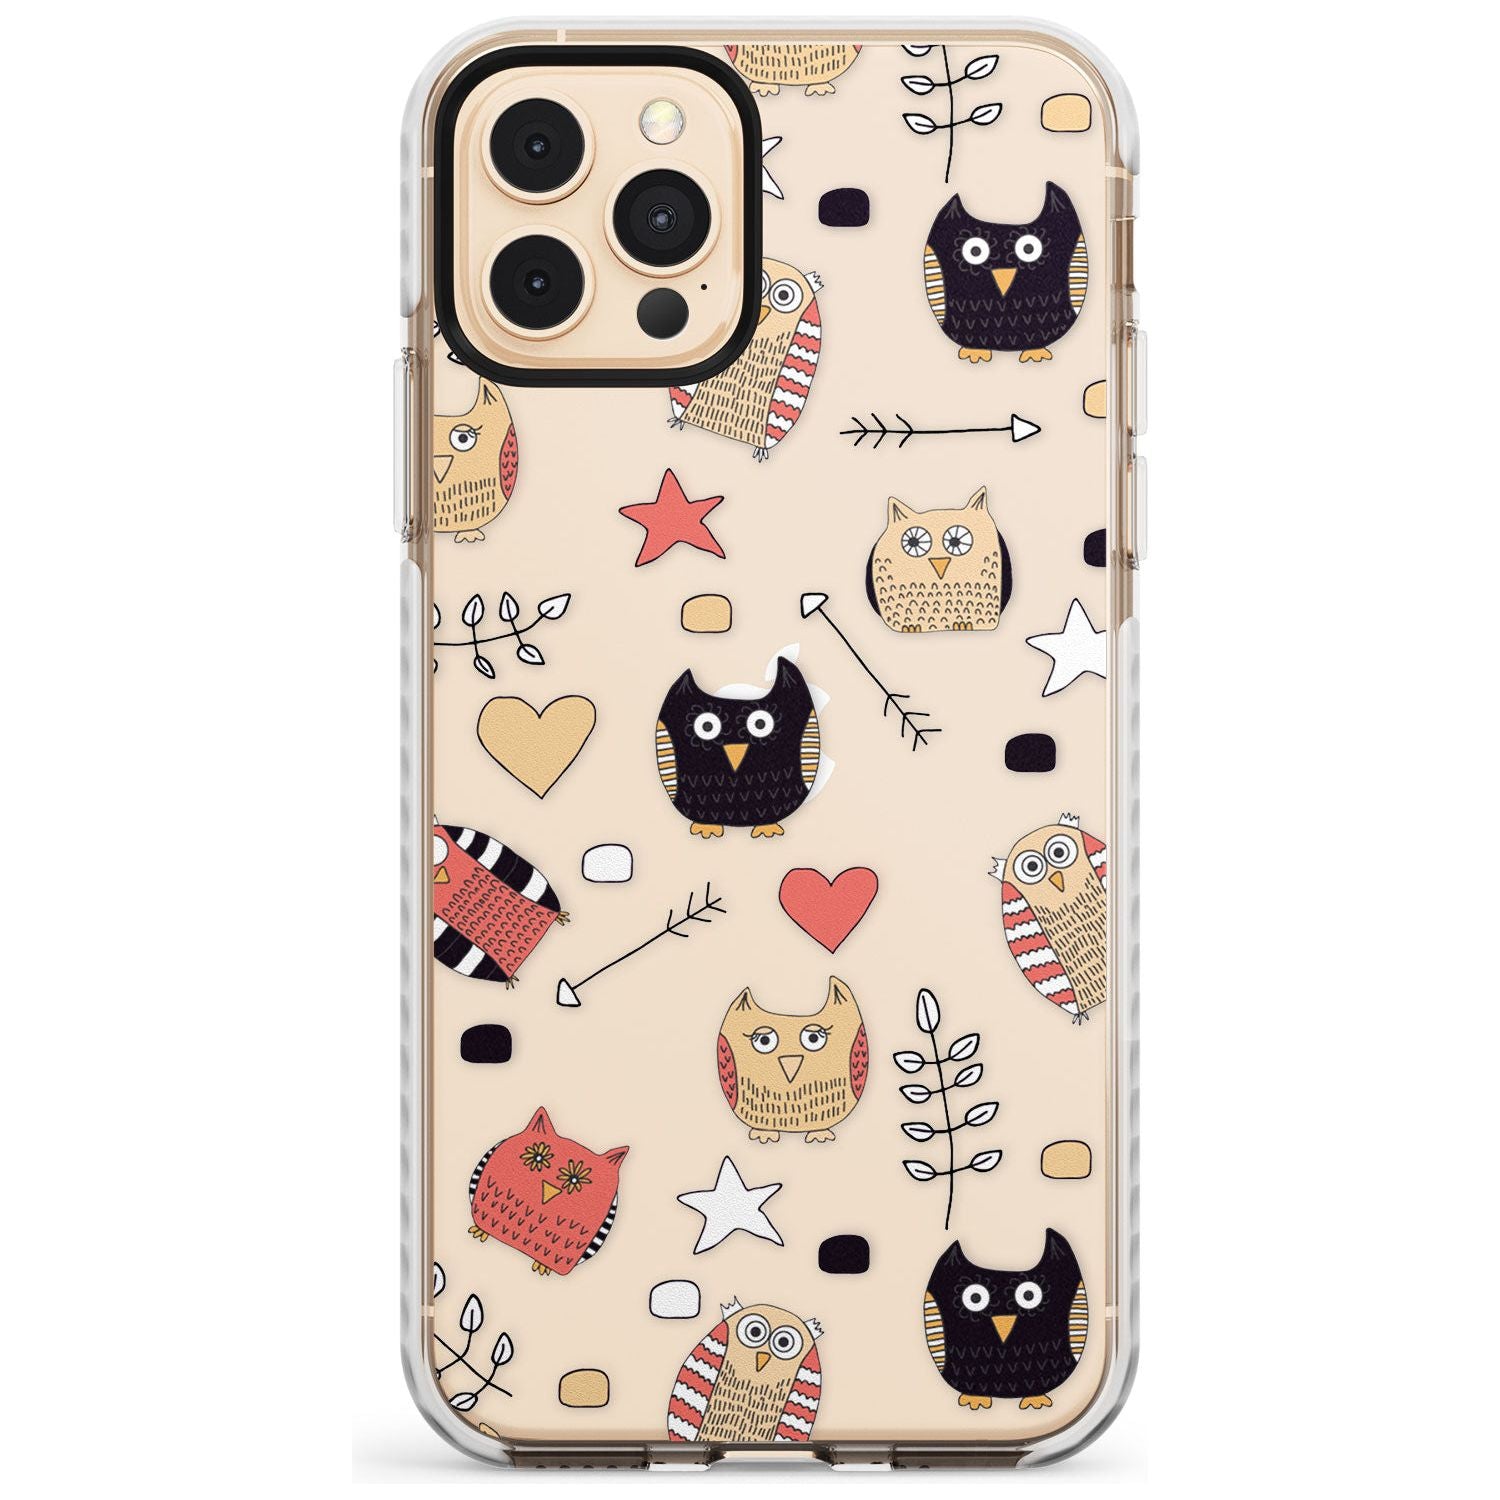 Cute Owl Pattern Impact Phone Case for iPhone 11 Pro Max